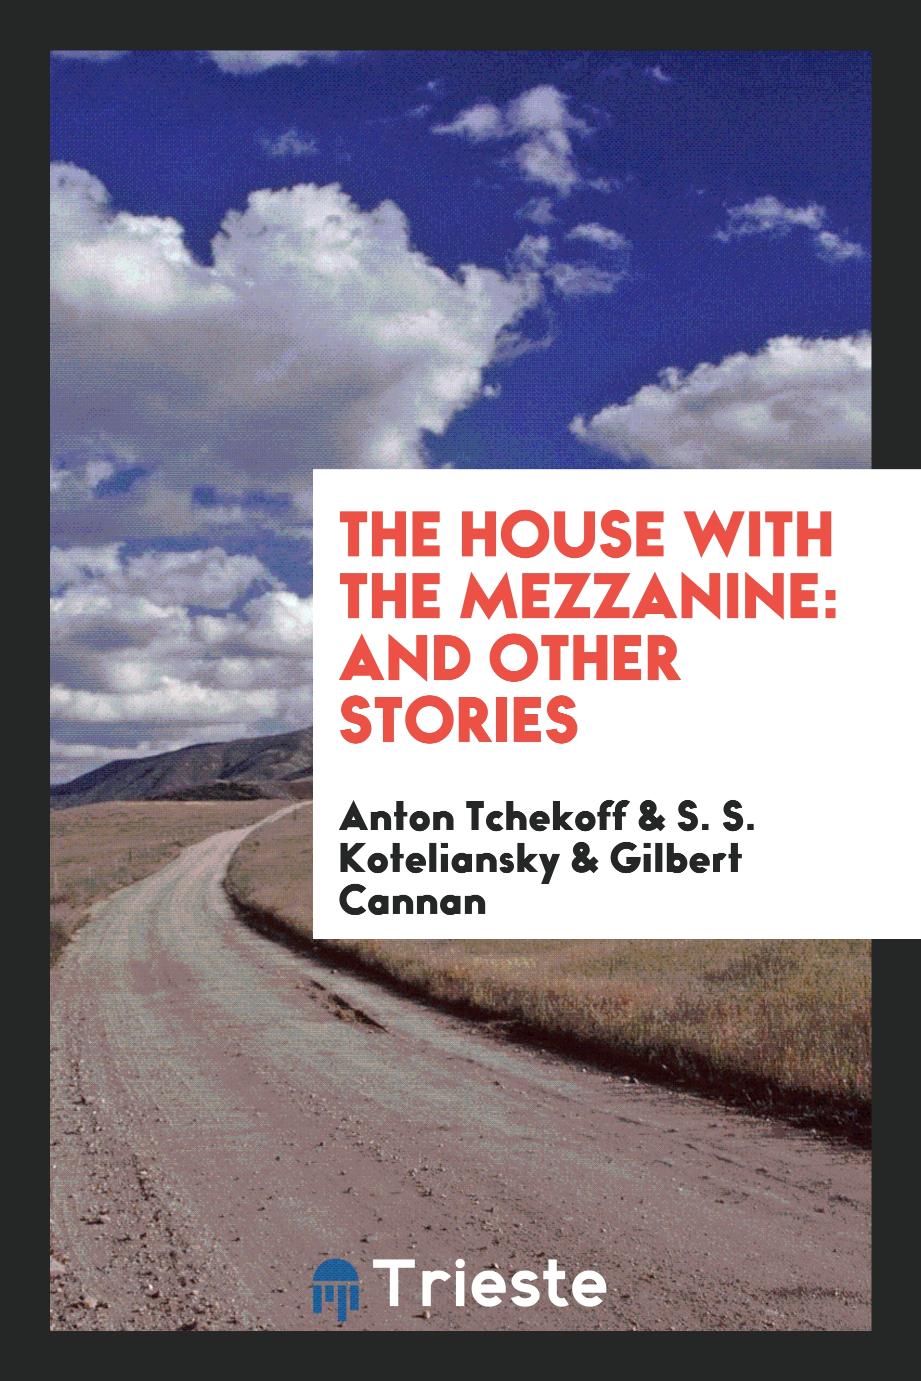 The House with the Mezzanine: And Other Stories